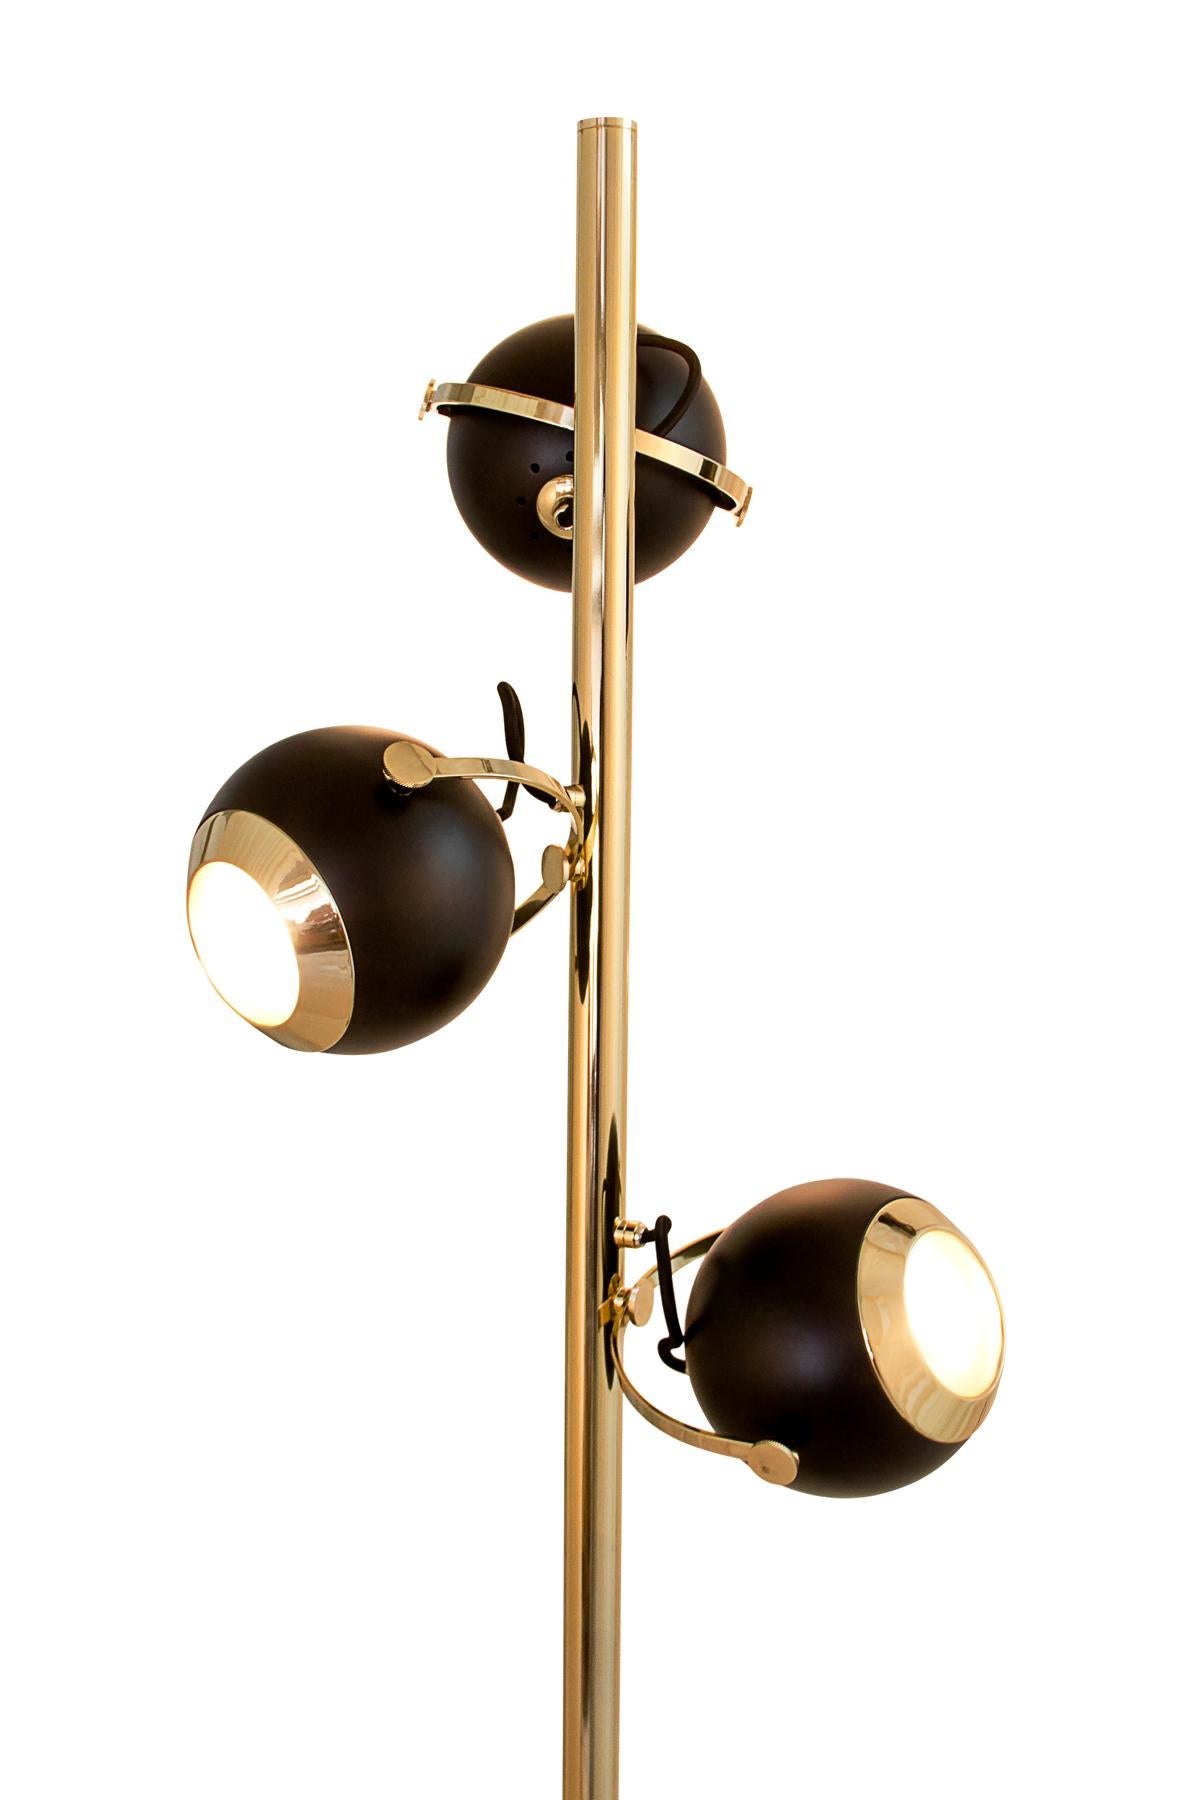 Hand-Crafted Scofield Floor Lamp in Brass and Gold Details For Sale